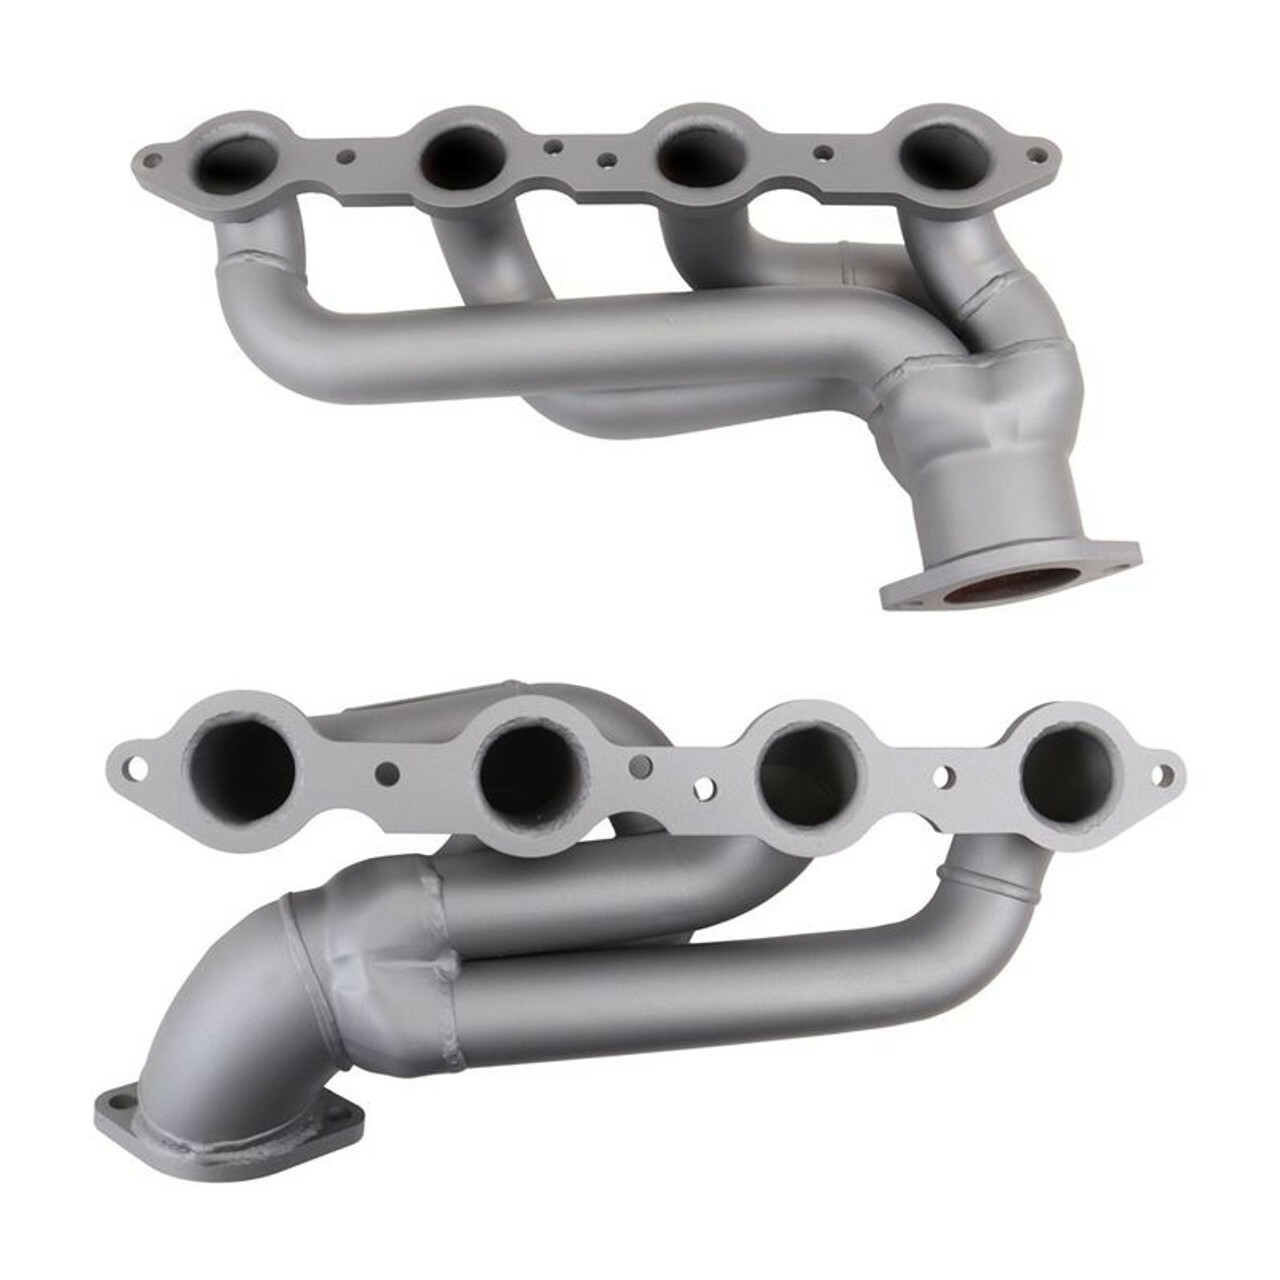 Chevy LS and LT Block Shorty and Mid Headers